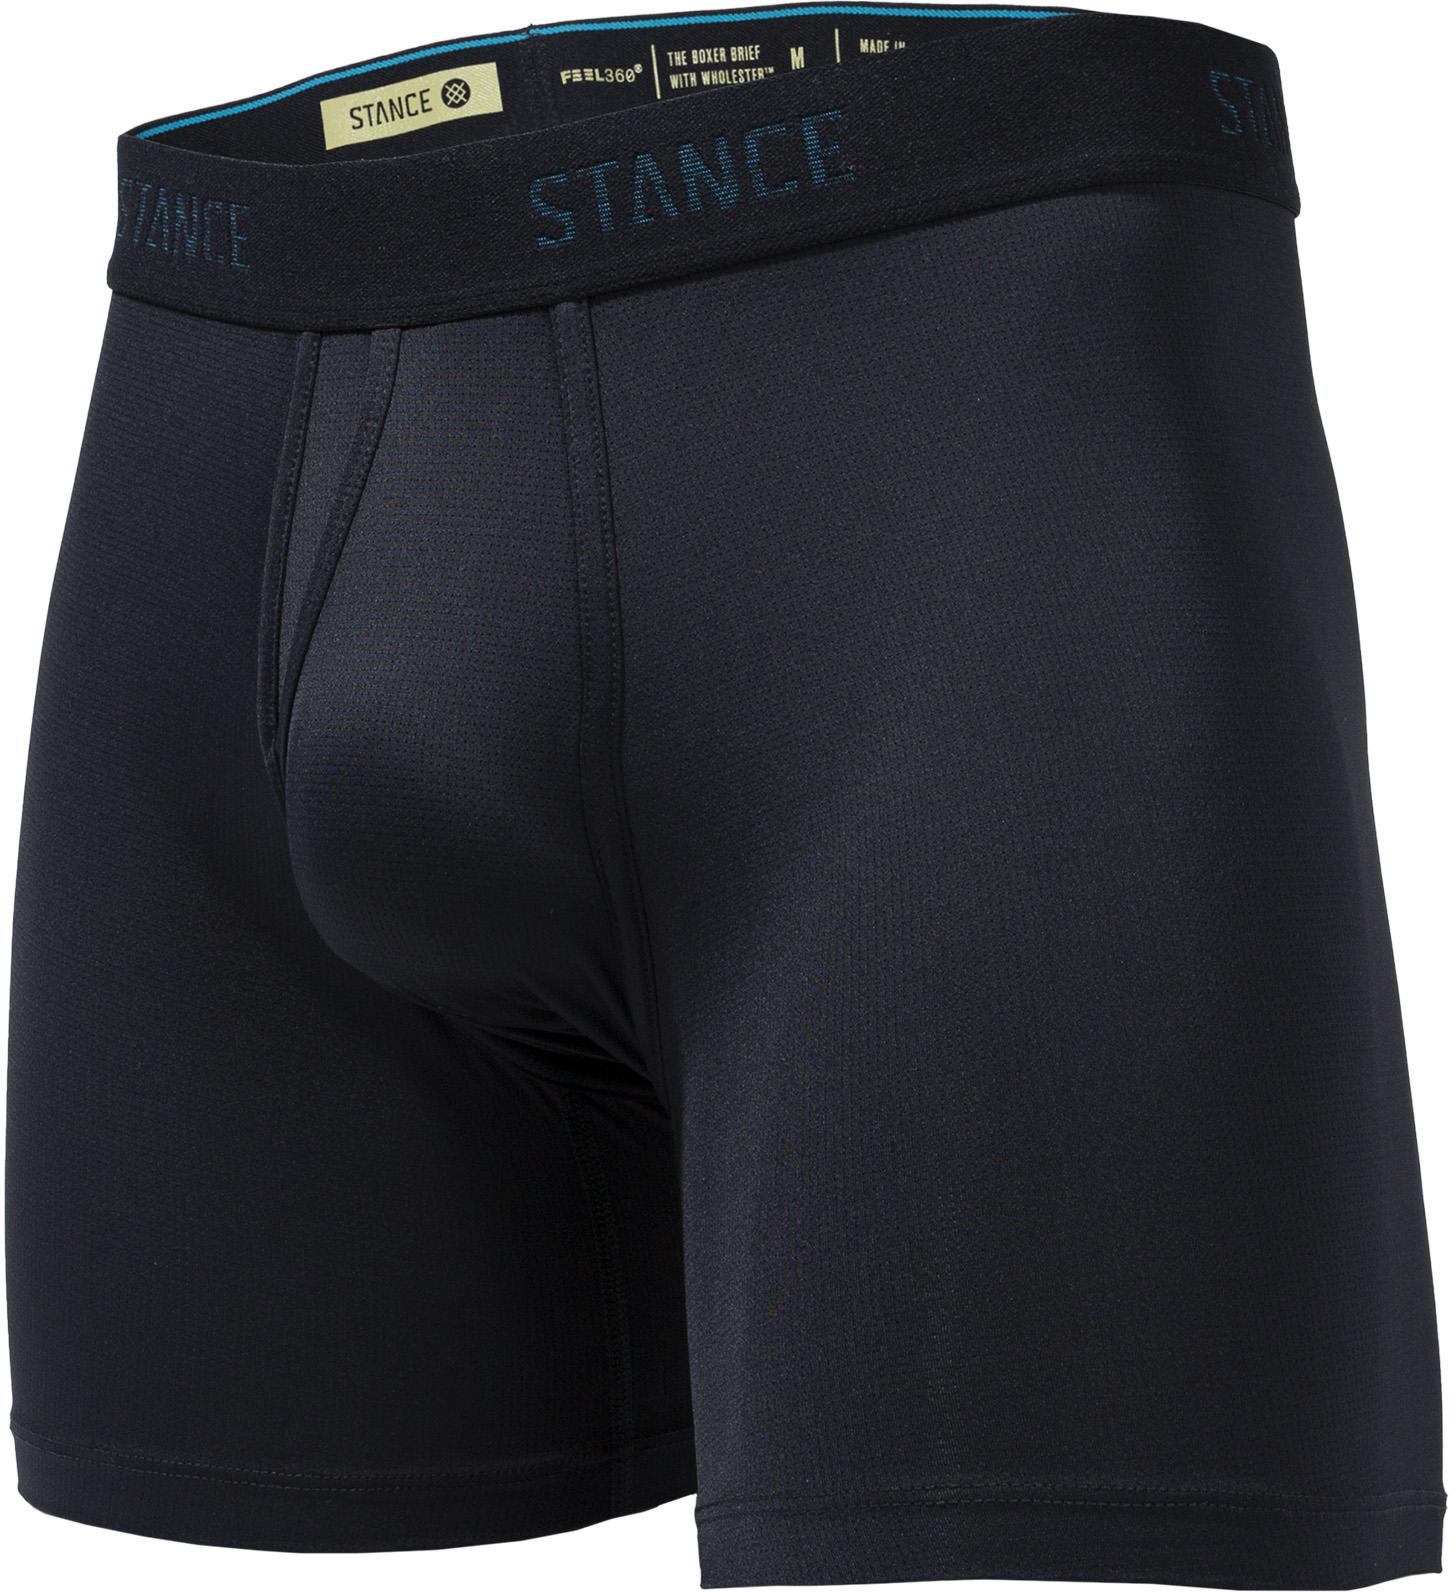 Stance Pure St 6inch Boxer - Black